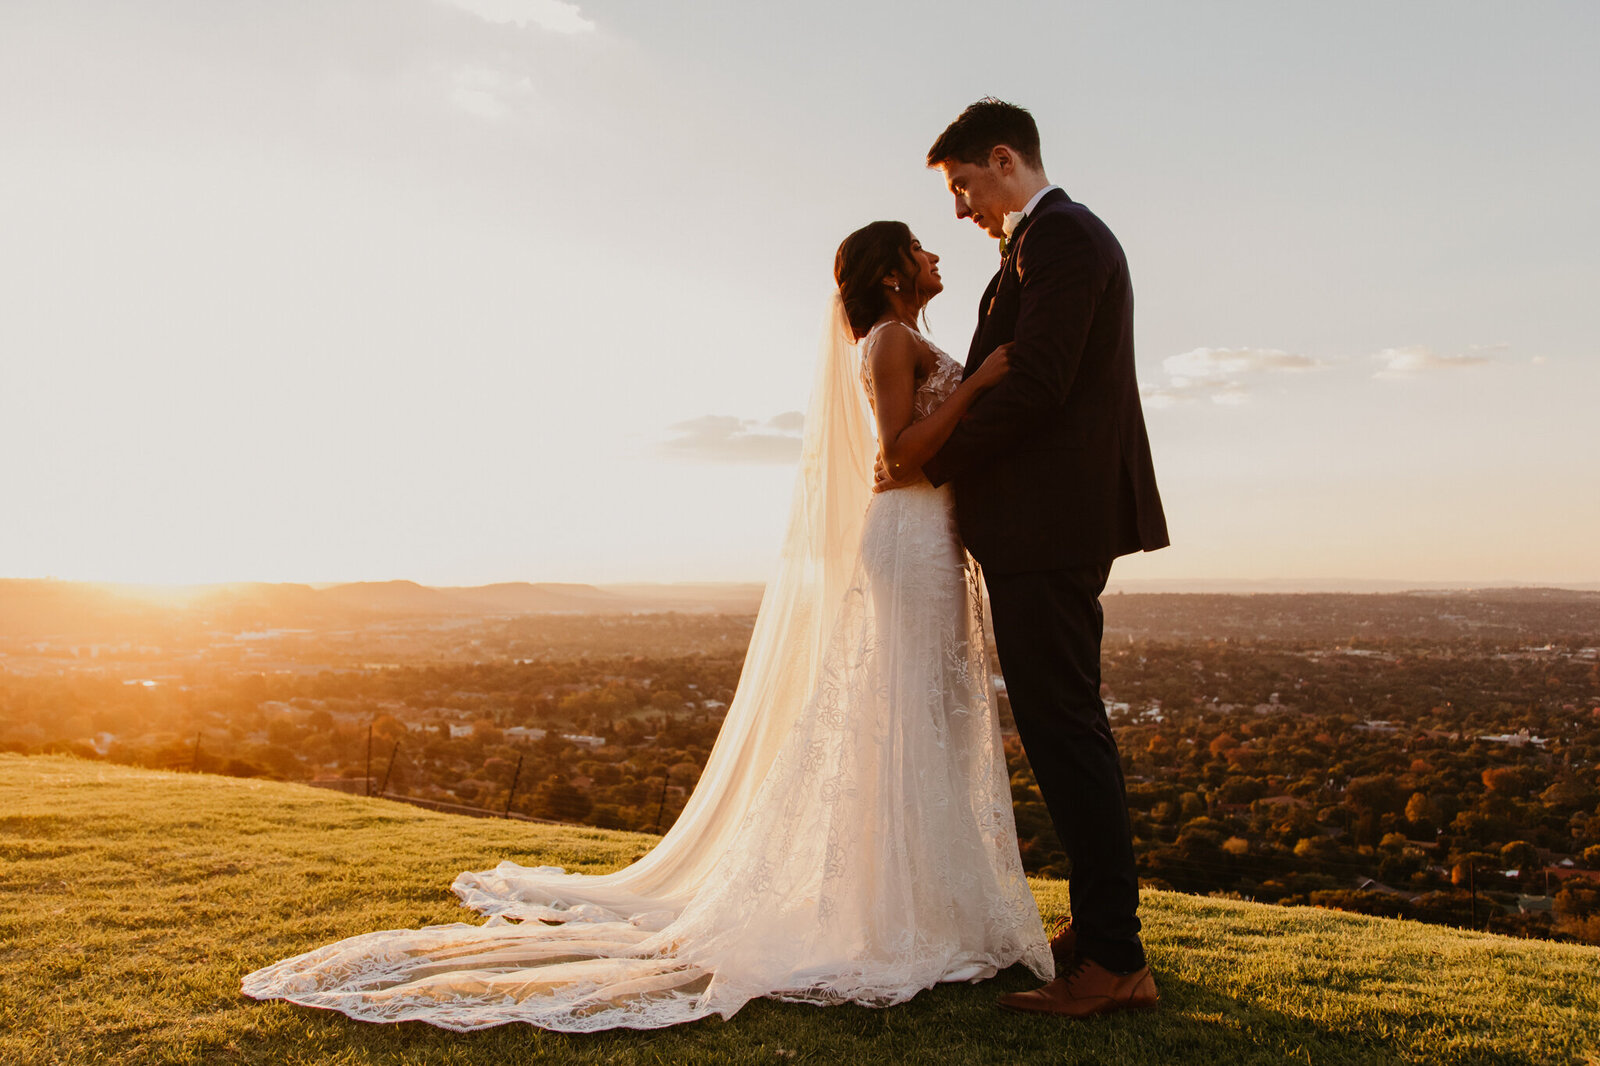 Sam and Thiana's intimate wedding at The Northcliff Boutique Hotel in Johannesburg.